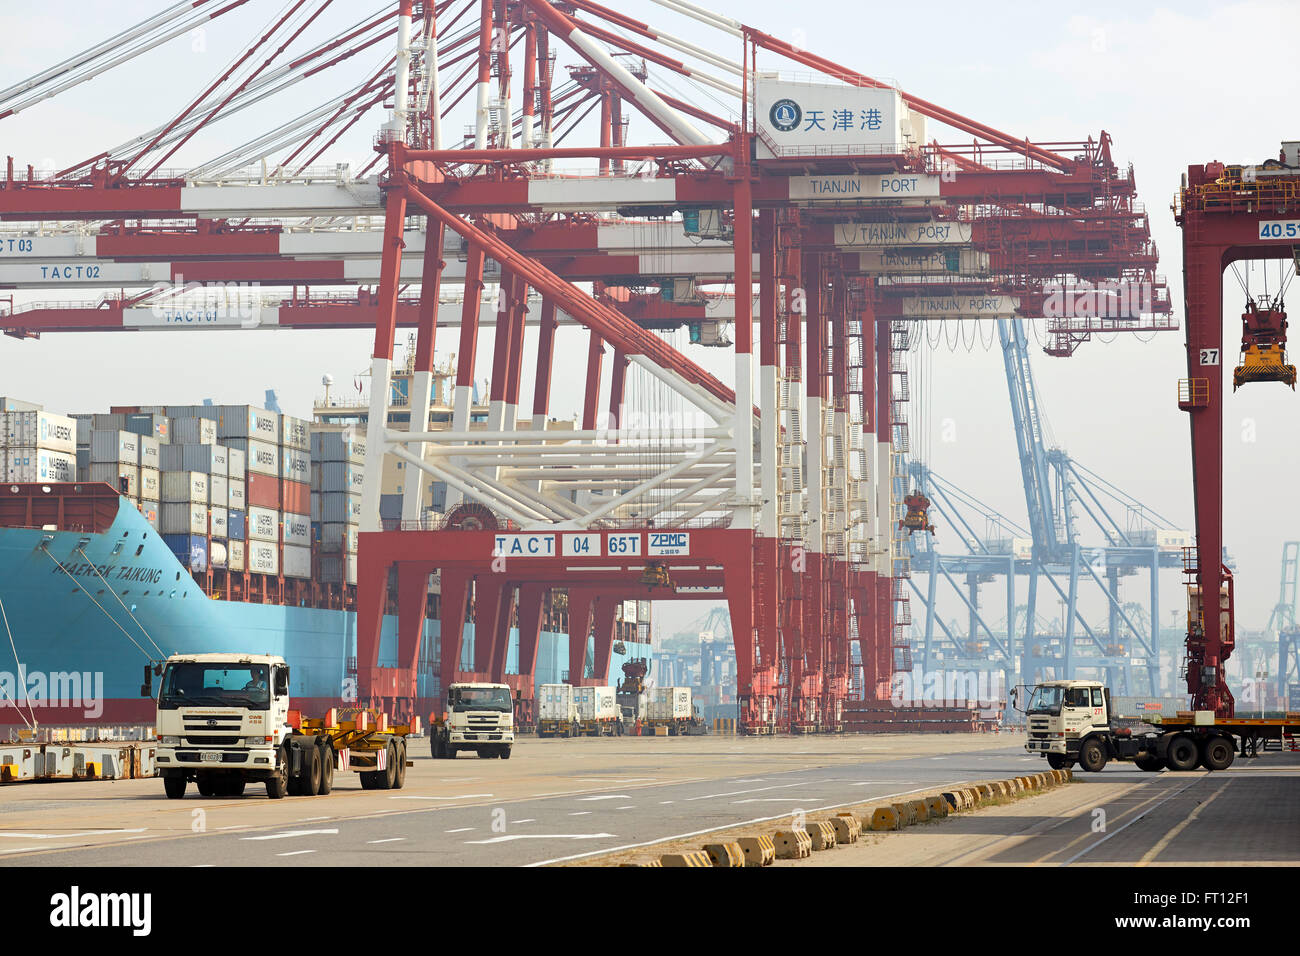 Container ship in port, Port de Tianjin, Tianjin, Chine Banque D'Images